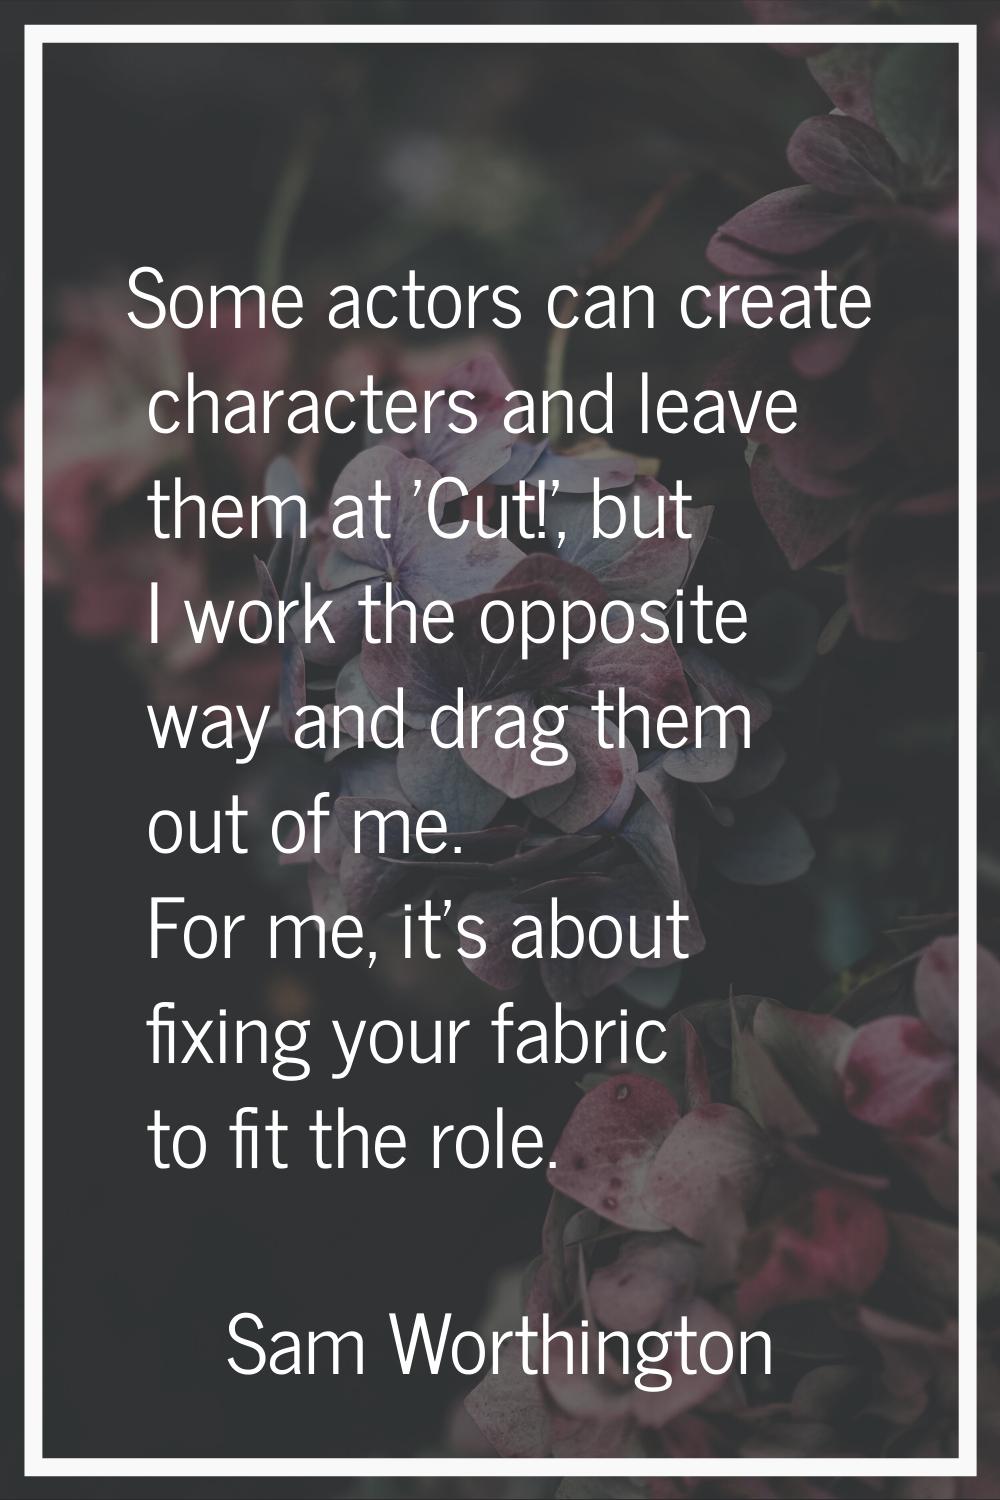 Some actors can create characters and leave them at 'Cut!', but I work the opposite way and drag th